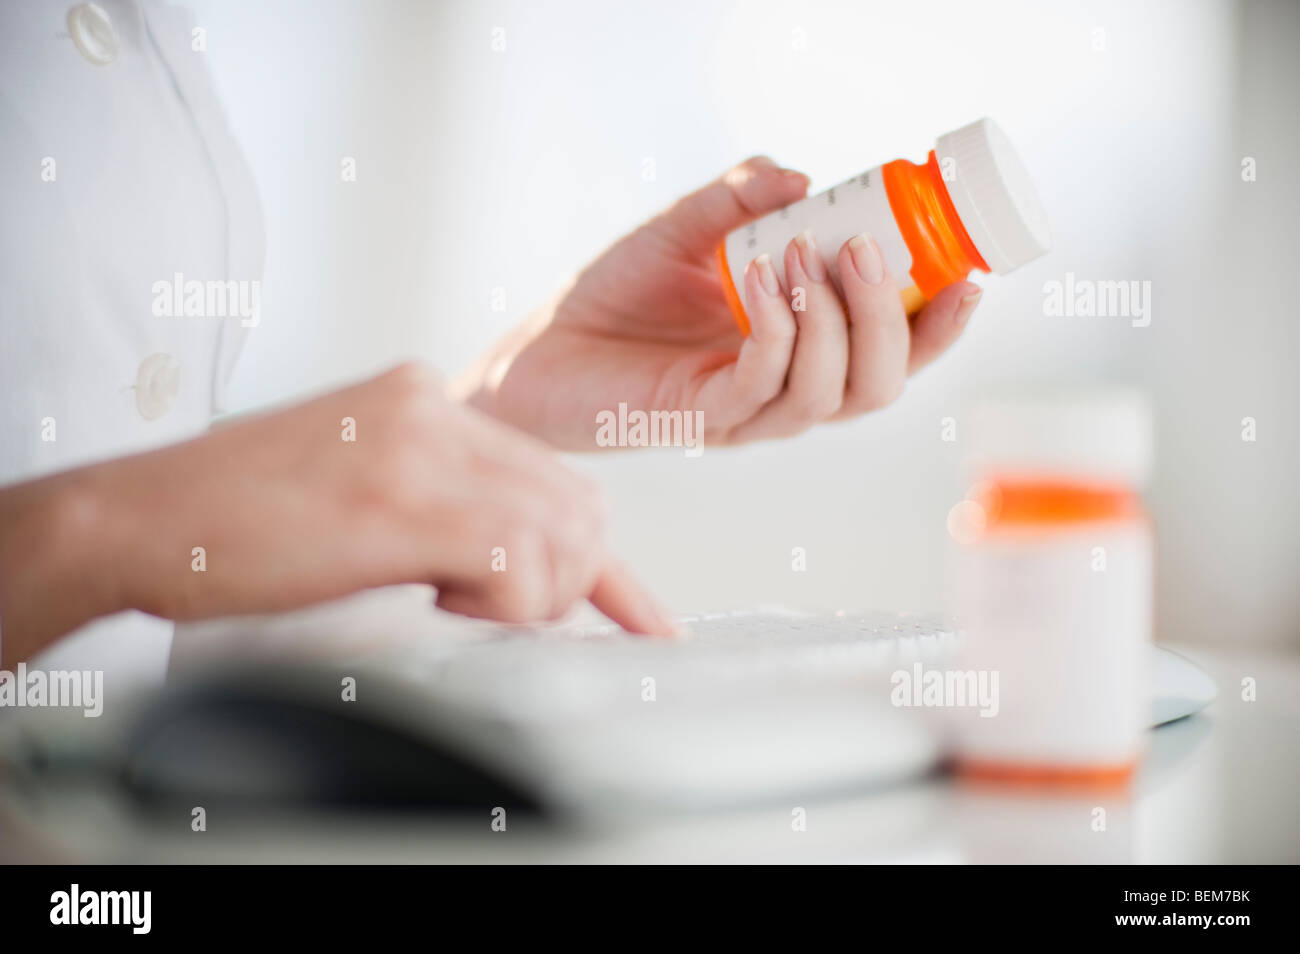 Woman reading medical label Stock Photo